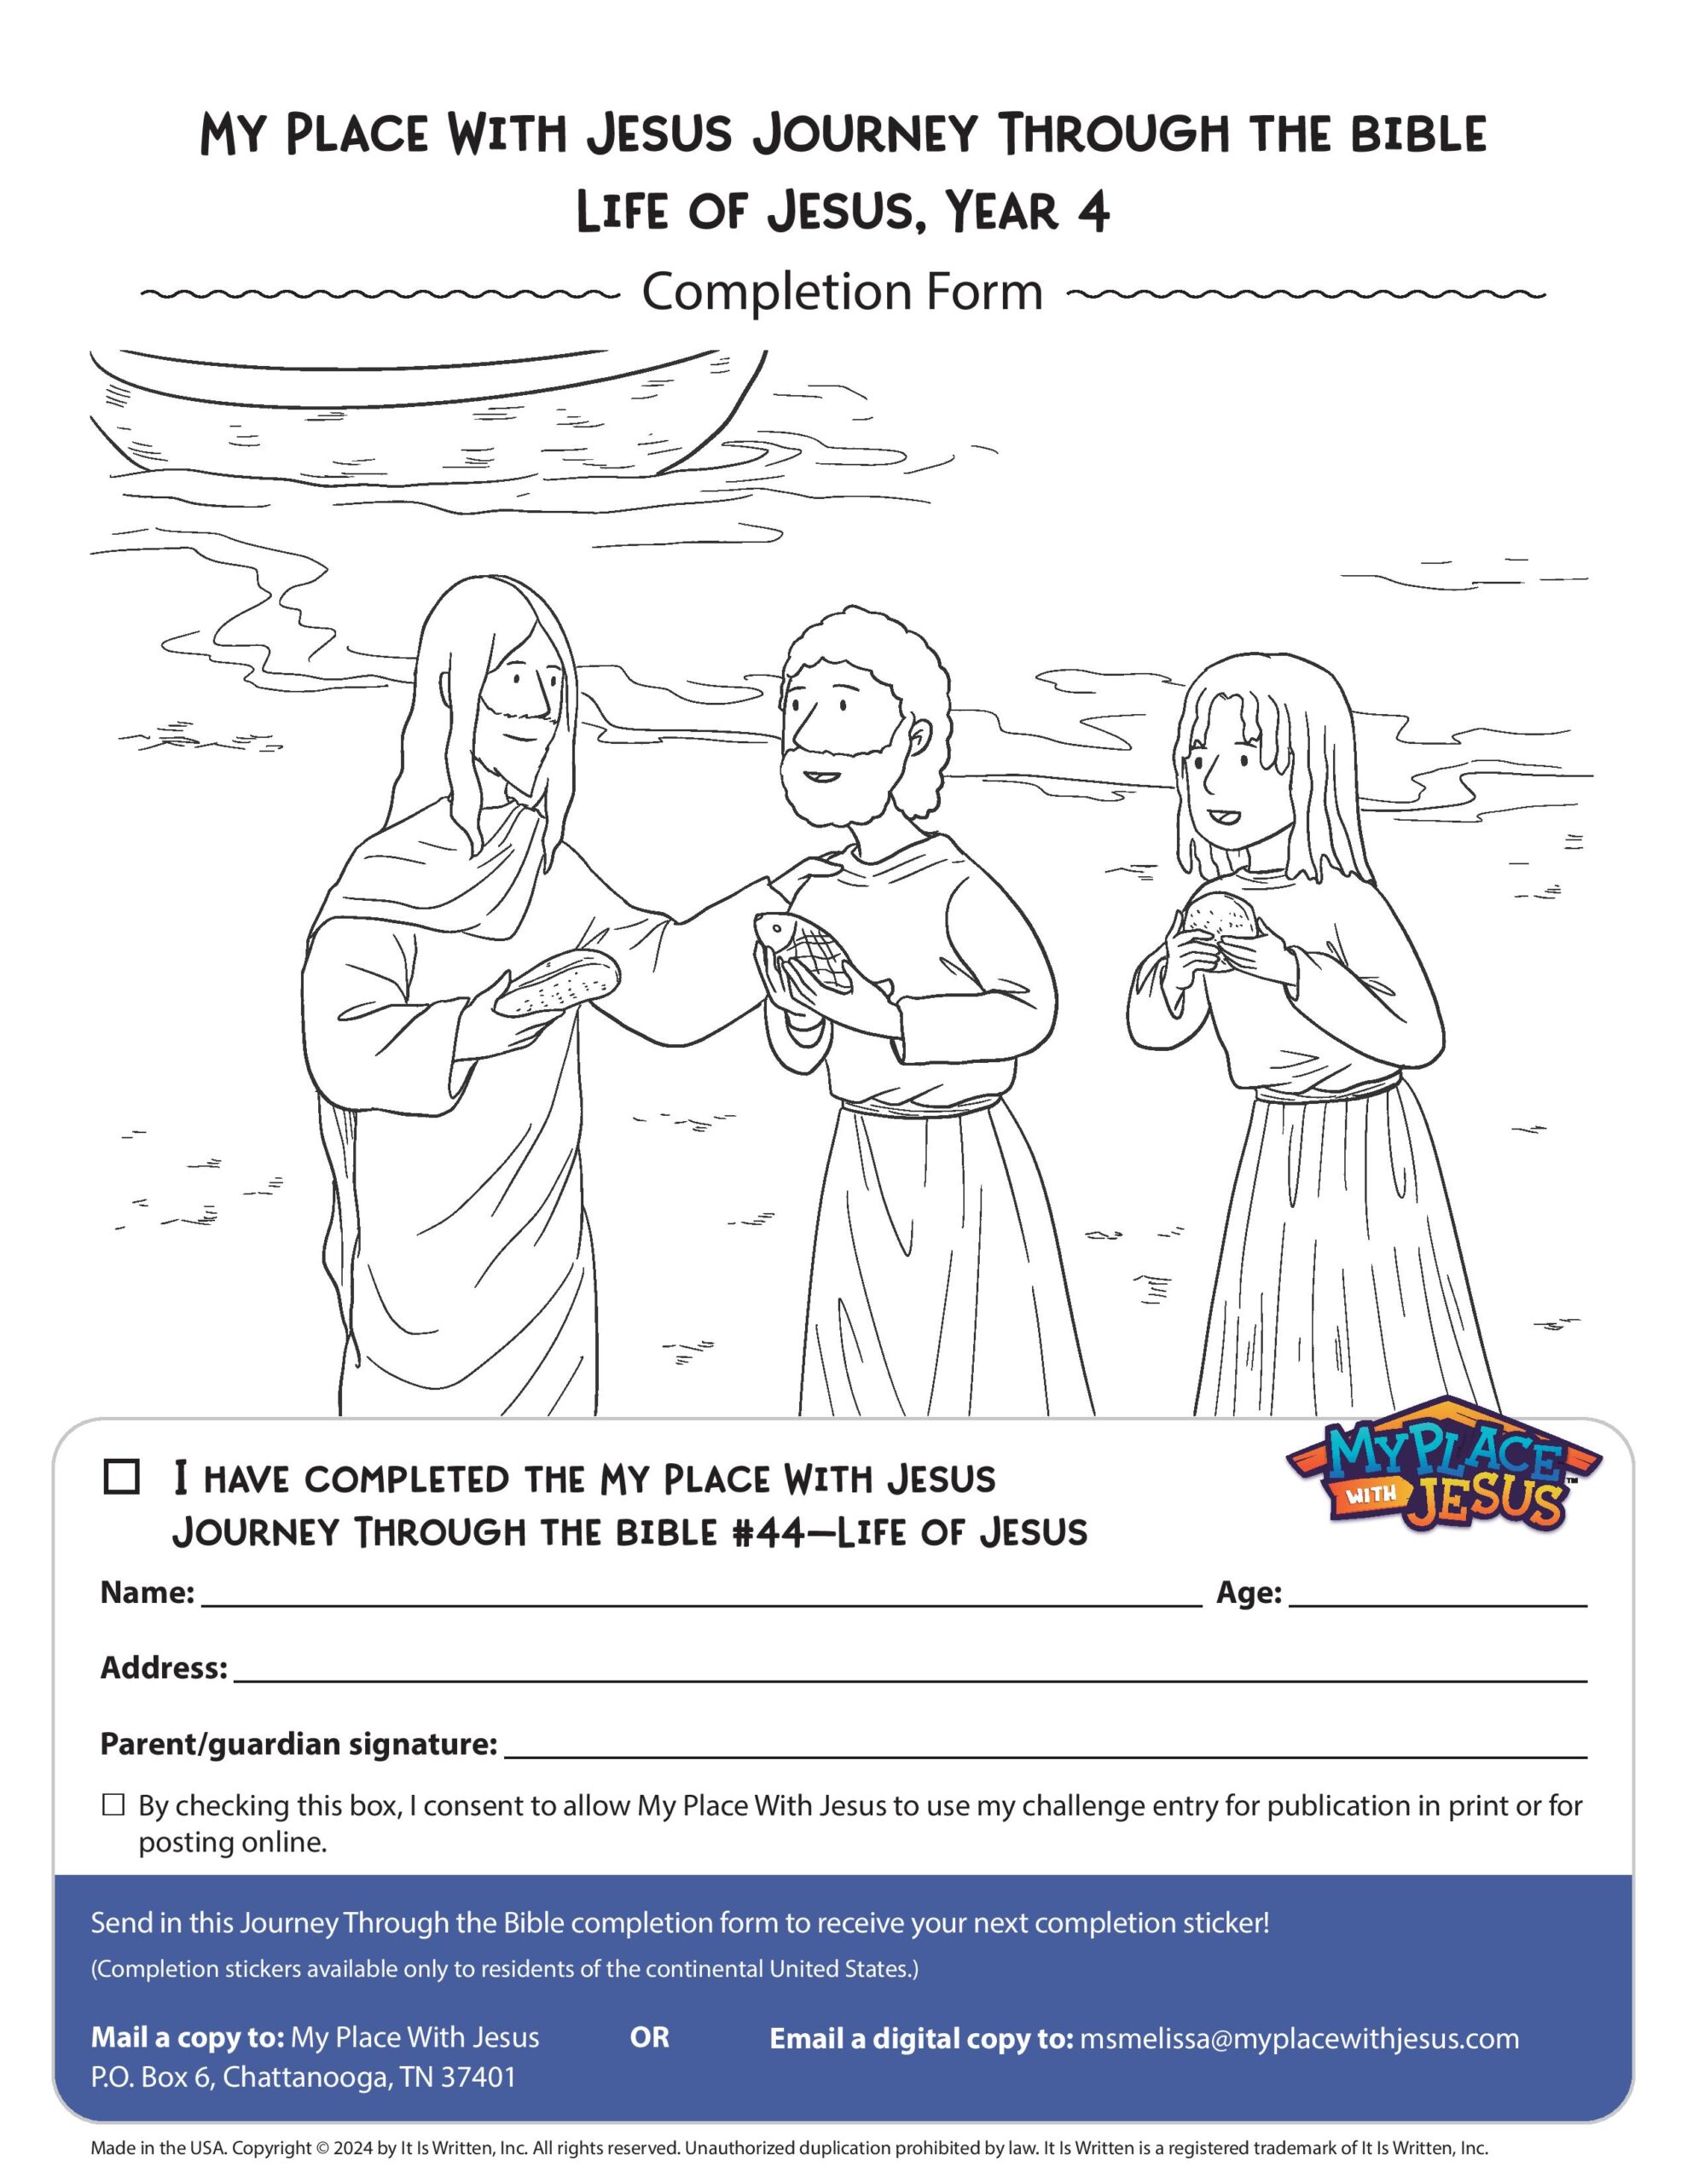 Journey Through the Bible 44 page 2